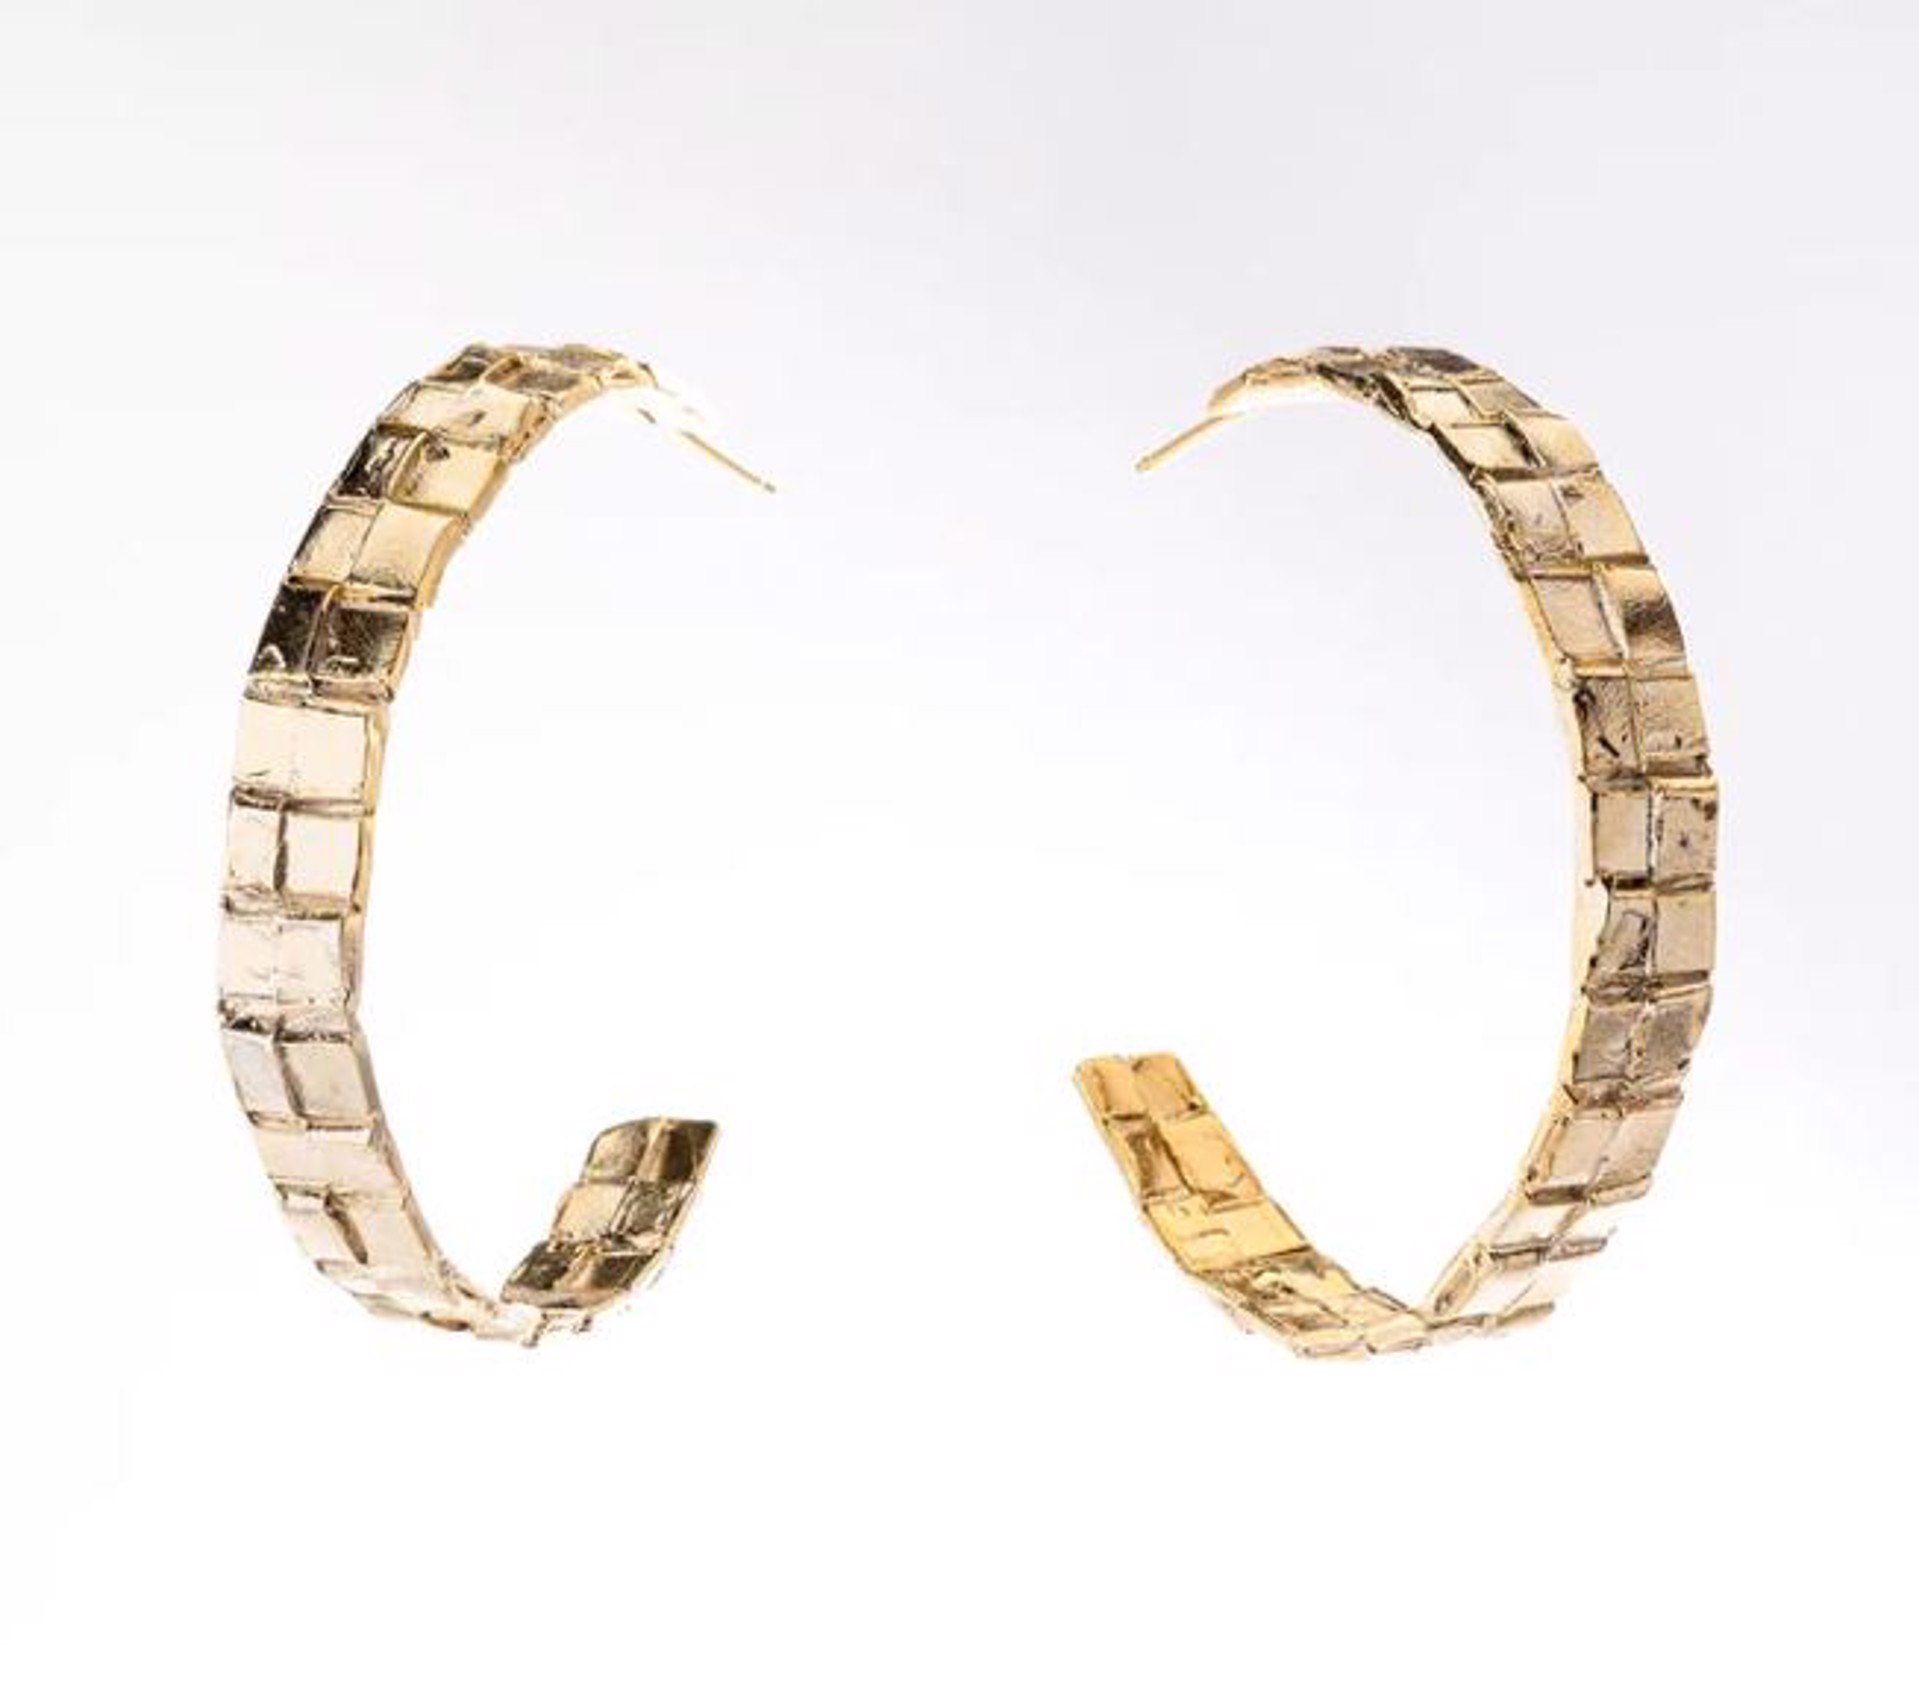 Large Double Woven Hoop Earrings - Gold Plated by Sydnie Wainland